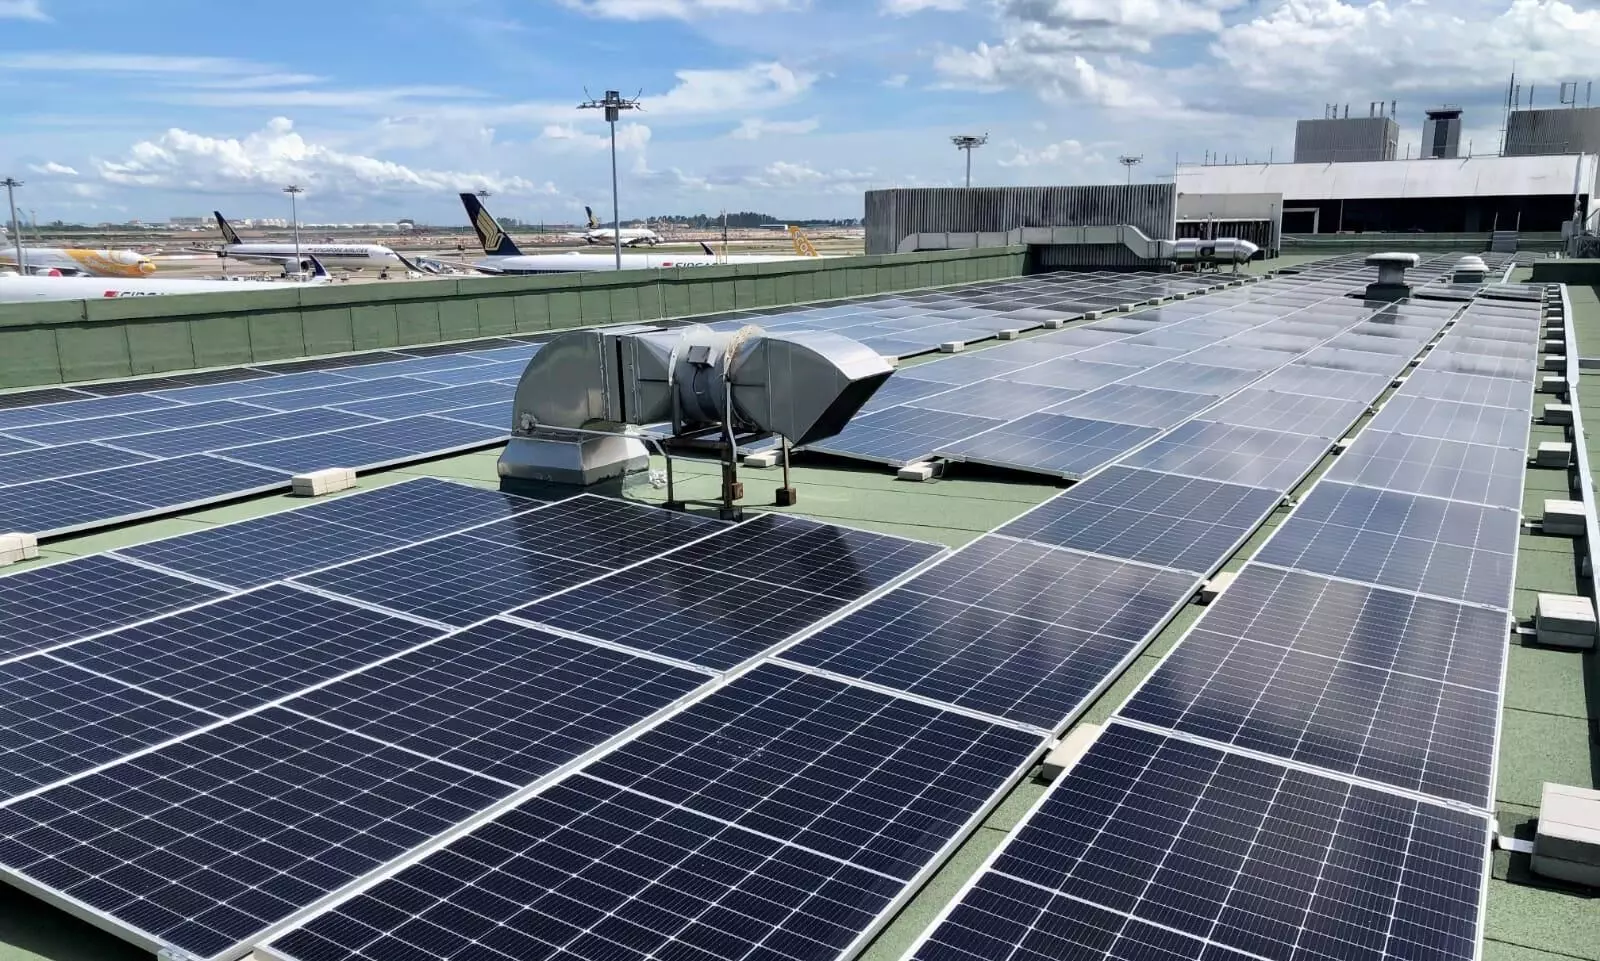 dnata invests in solar energy at Changi Airport